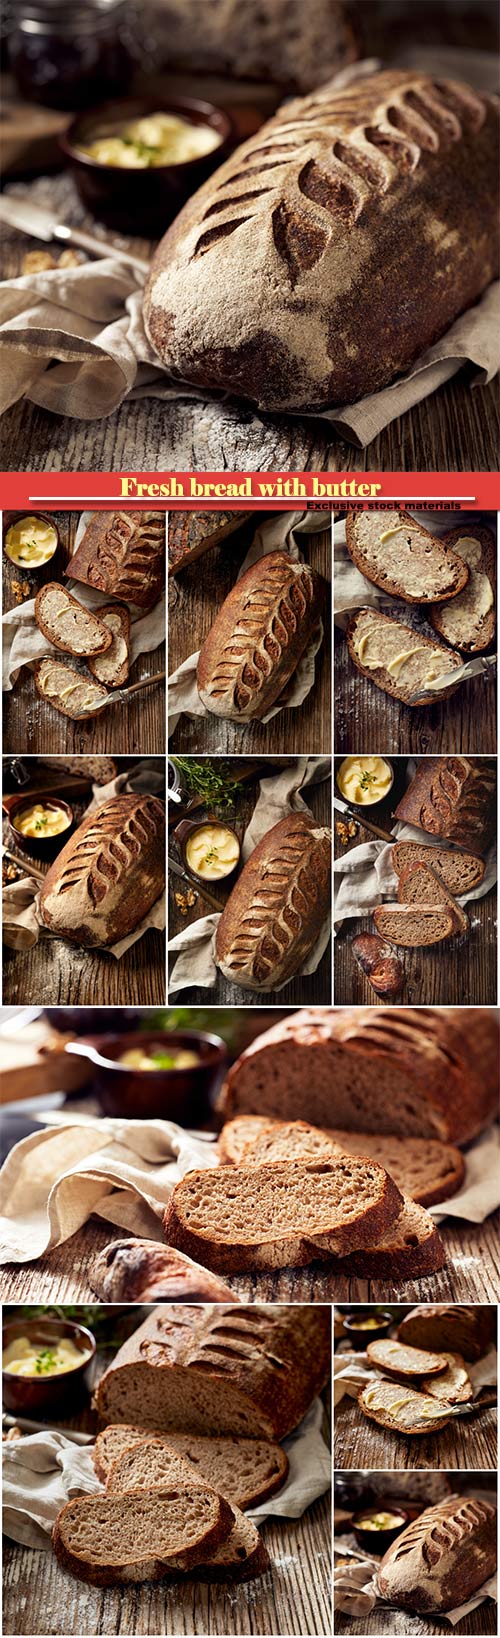 Fresh bread with butter on a wooden background